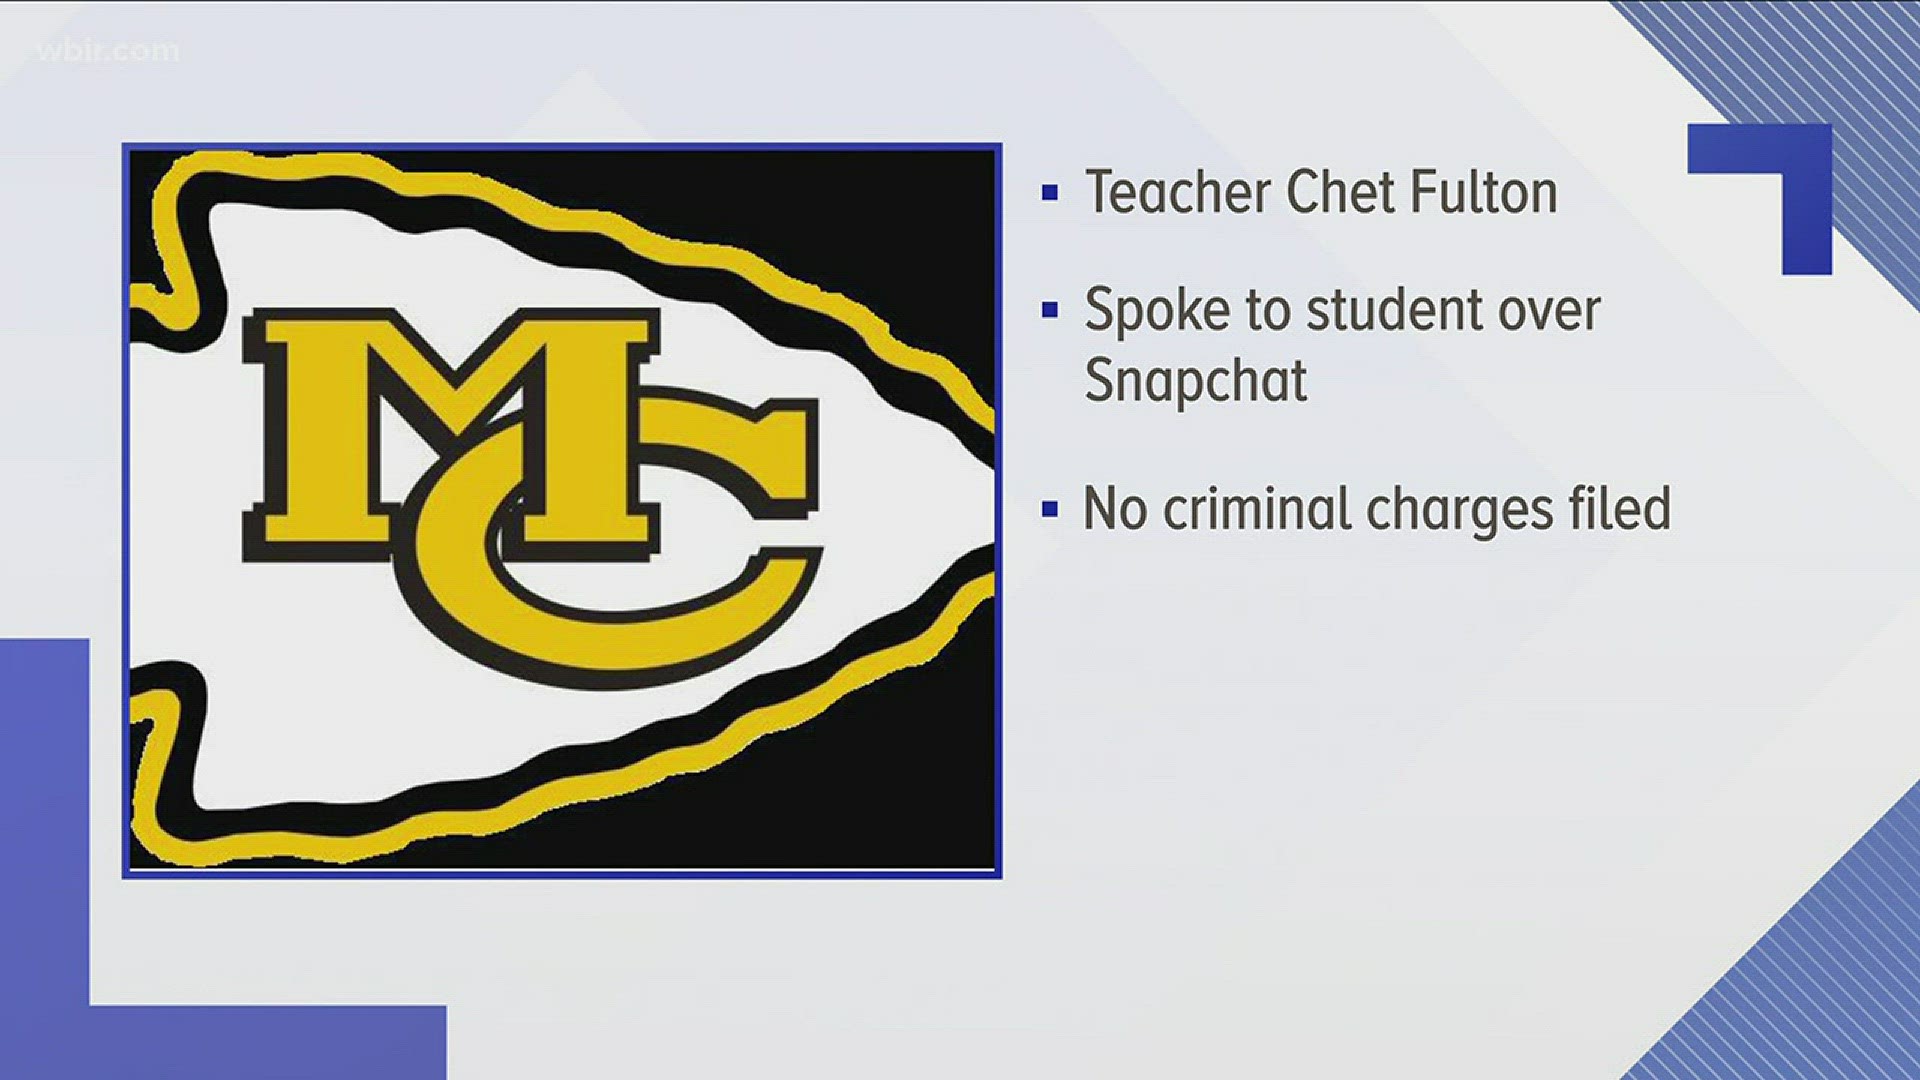 March 7, 2018: McMinn County Schools leaders dismissed a teacher for inappropriate communications with a female student.